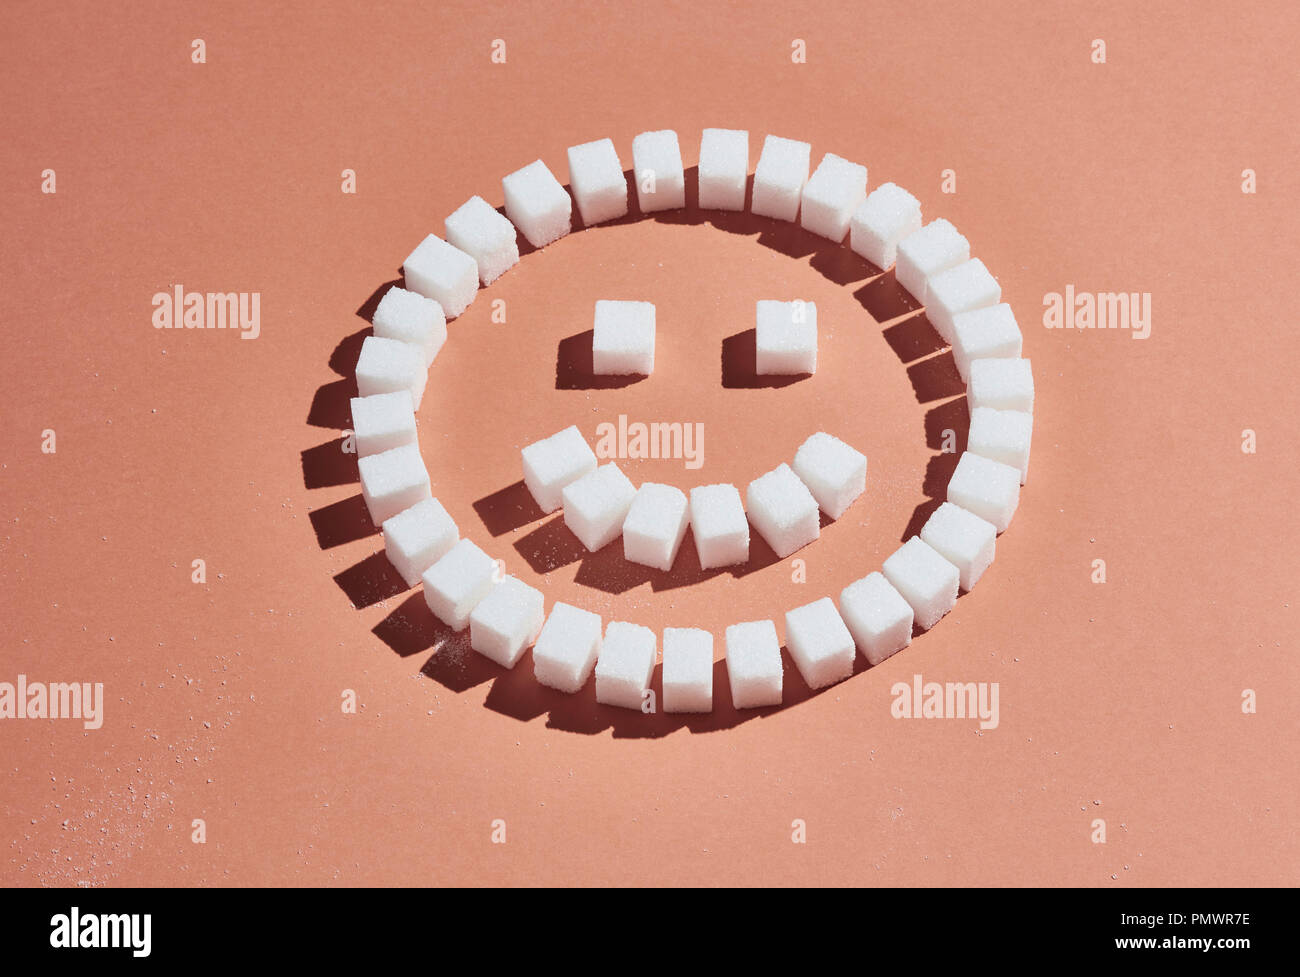 Sugar cubes forming smiley face on peach background Stock Photo